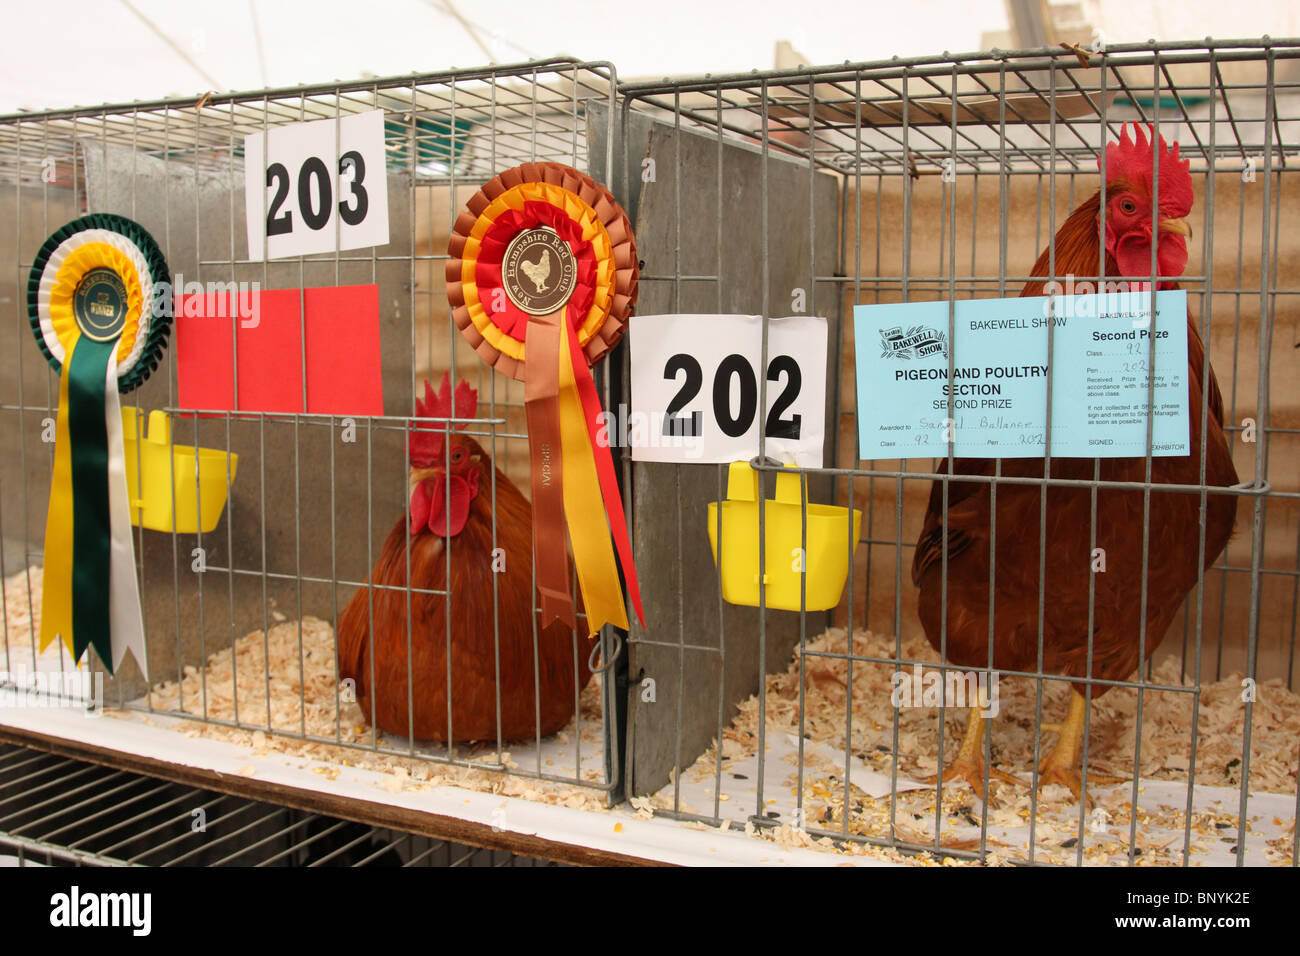 Poultry at the Bakewell Show, Bakewell, Derbyshire, England, U.K. Stock Photo